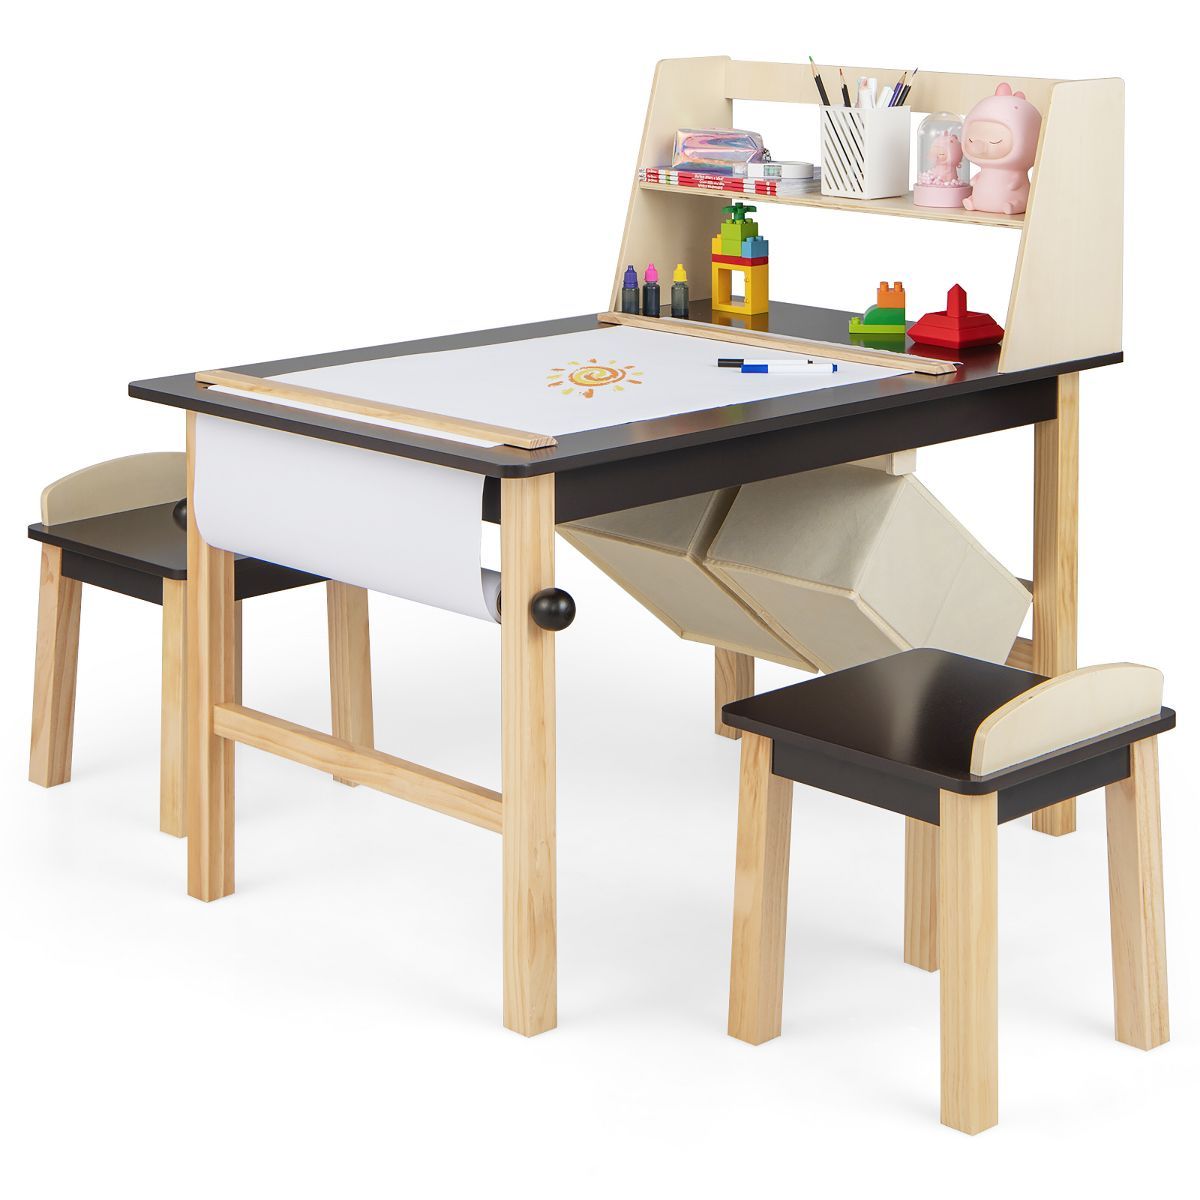 Costway Kids Art Table & Chairs Set Wooden Drawing Desk with Paper Roll Storage Shelf Bins | Target